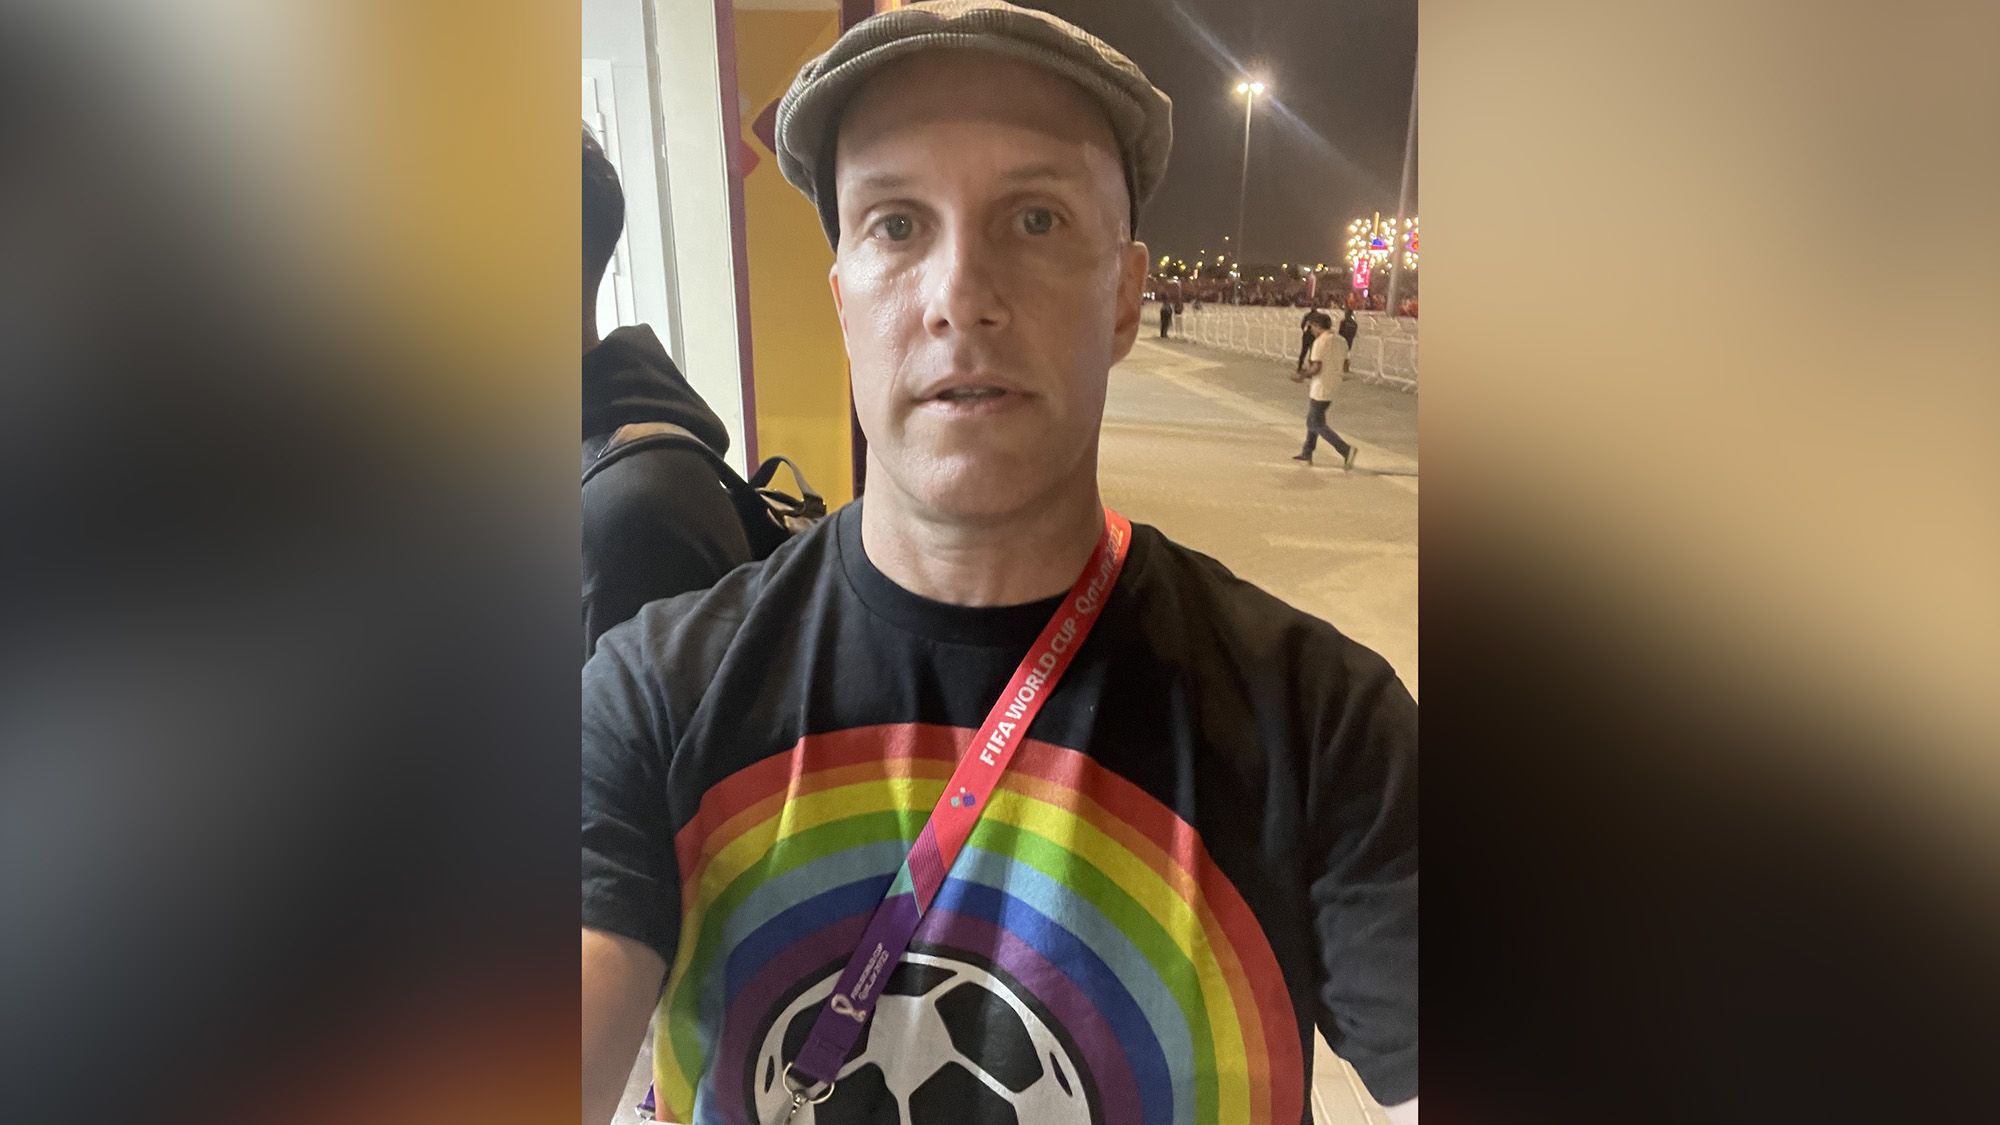 Rainbow clothing: US journalist says he was initially denied entry